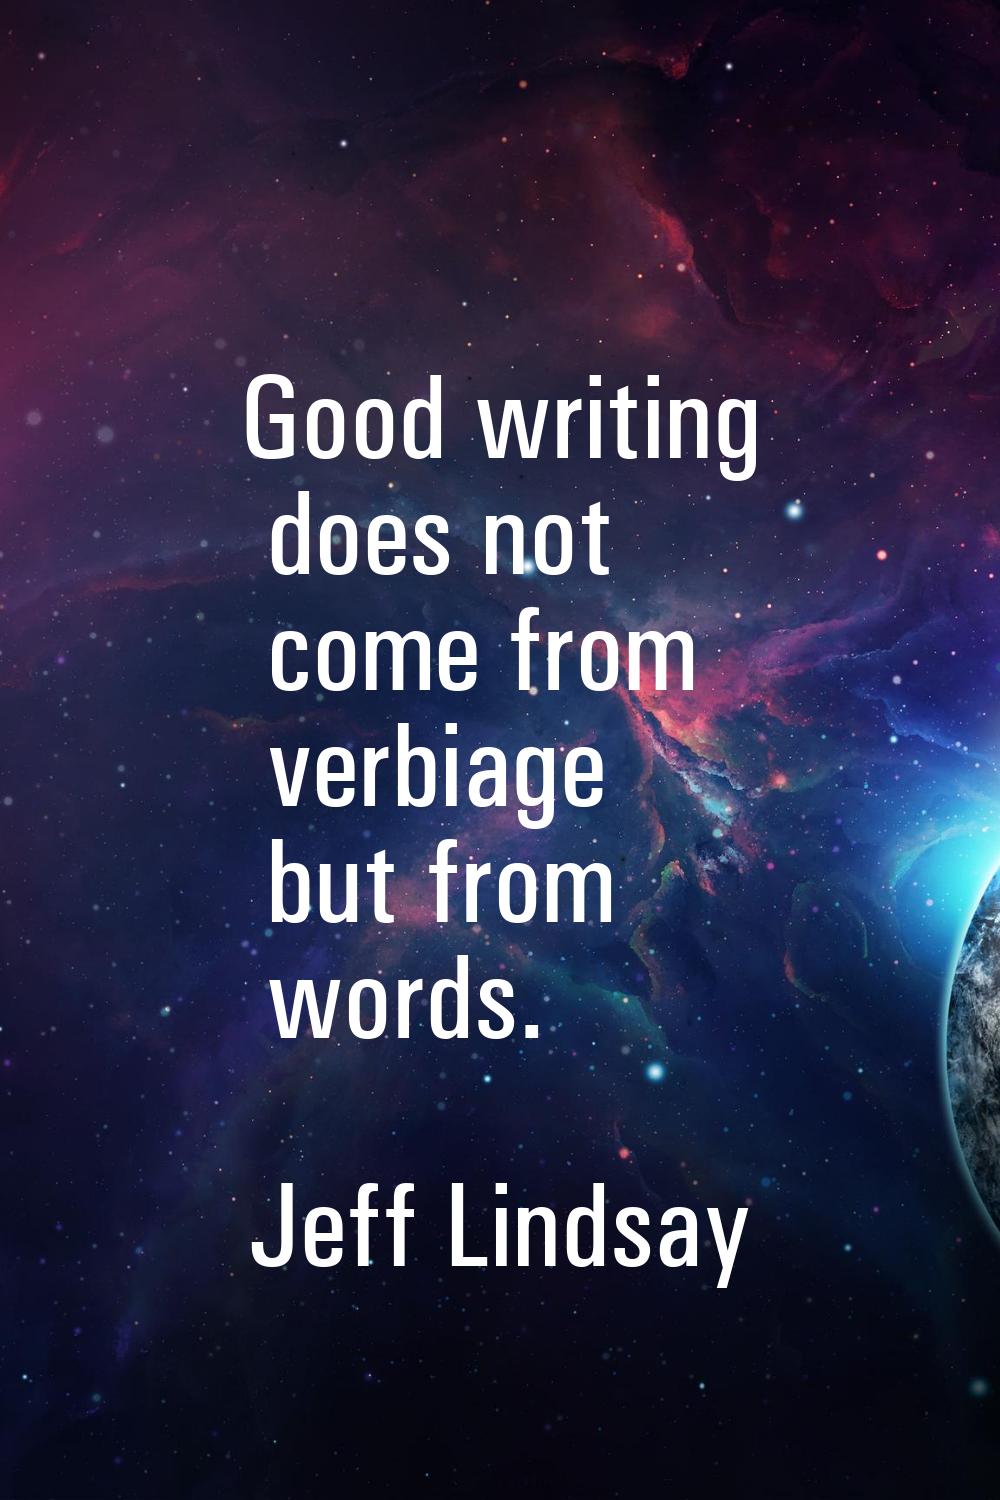 Good writing does not come from verbiage but from words.